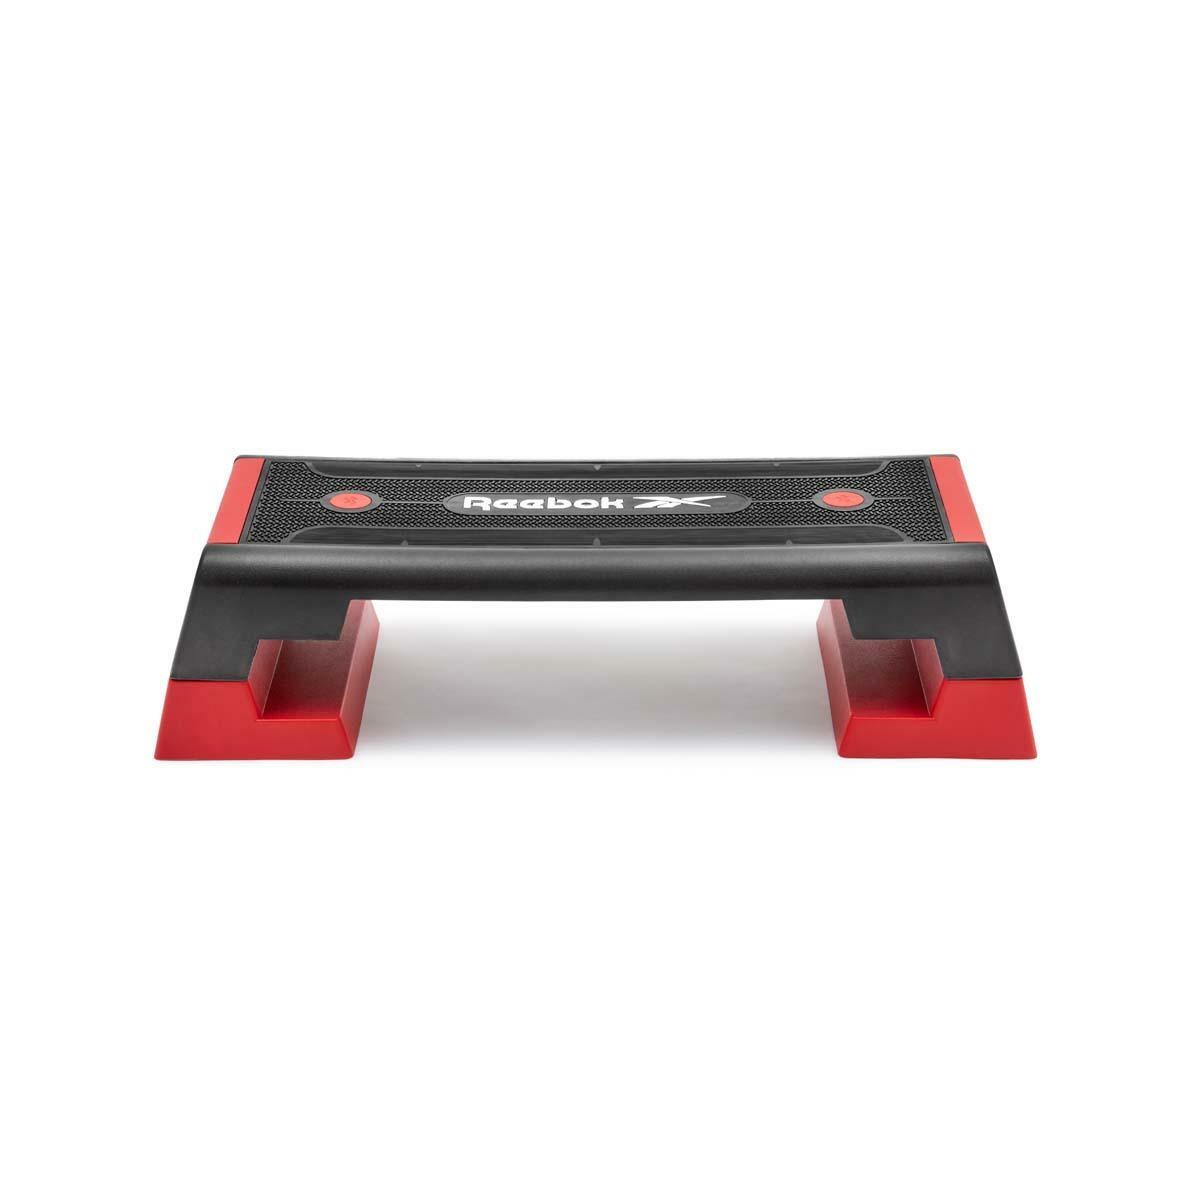 Reebok Step with Bluetooth Counter RAP-12150